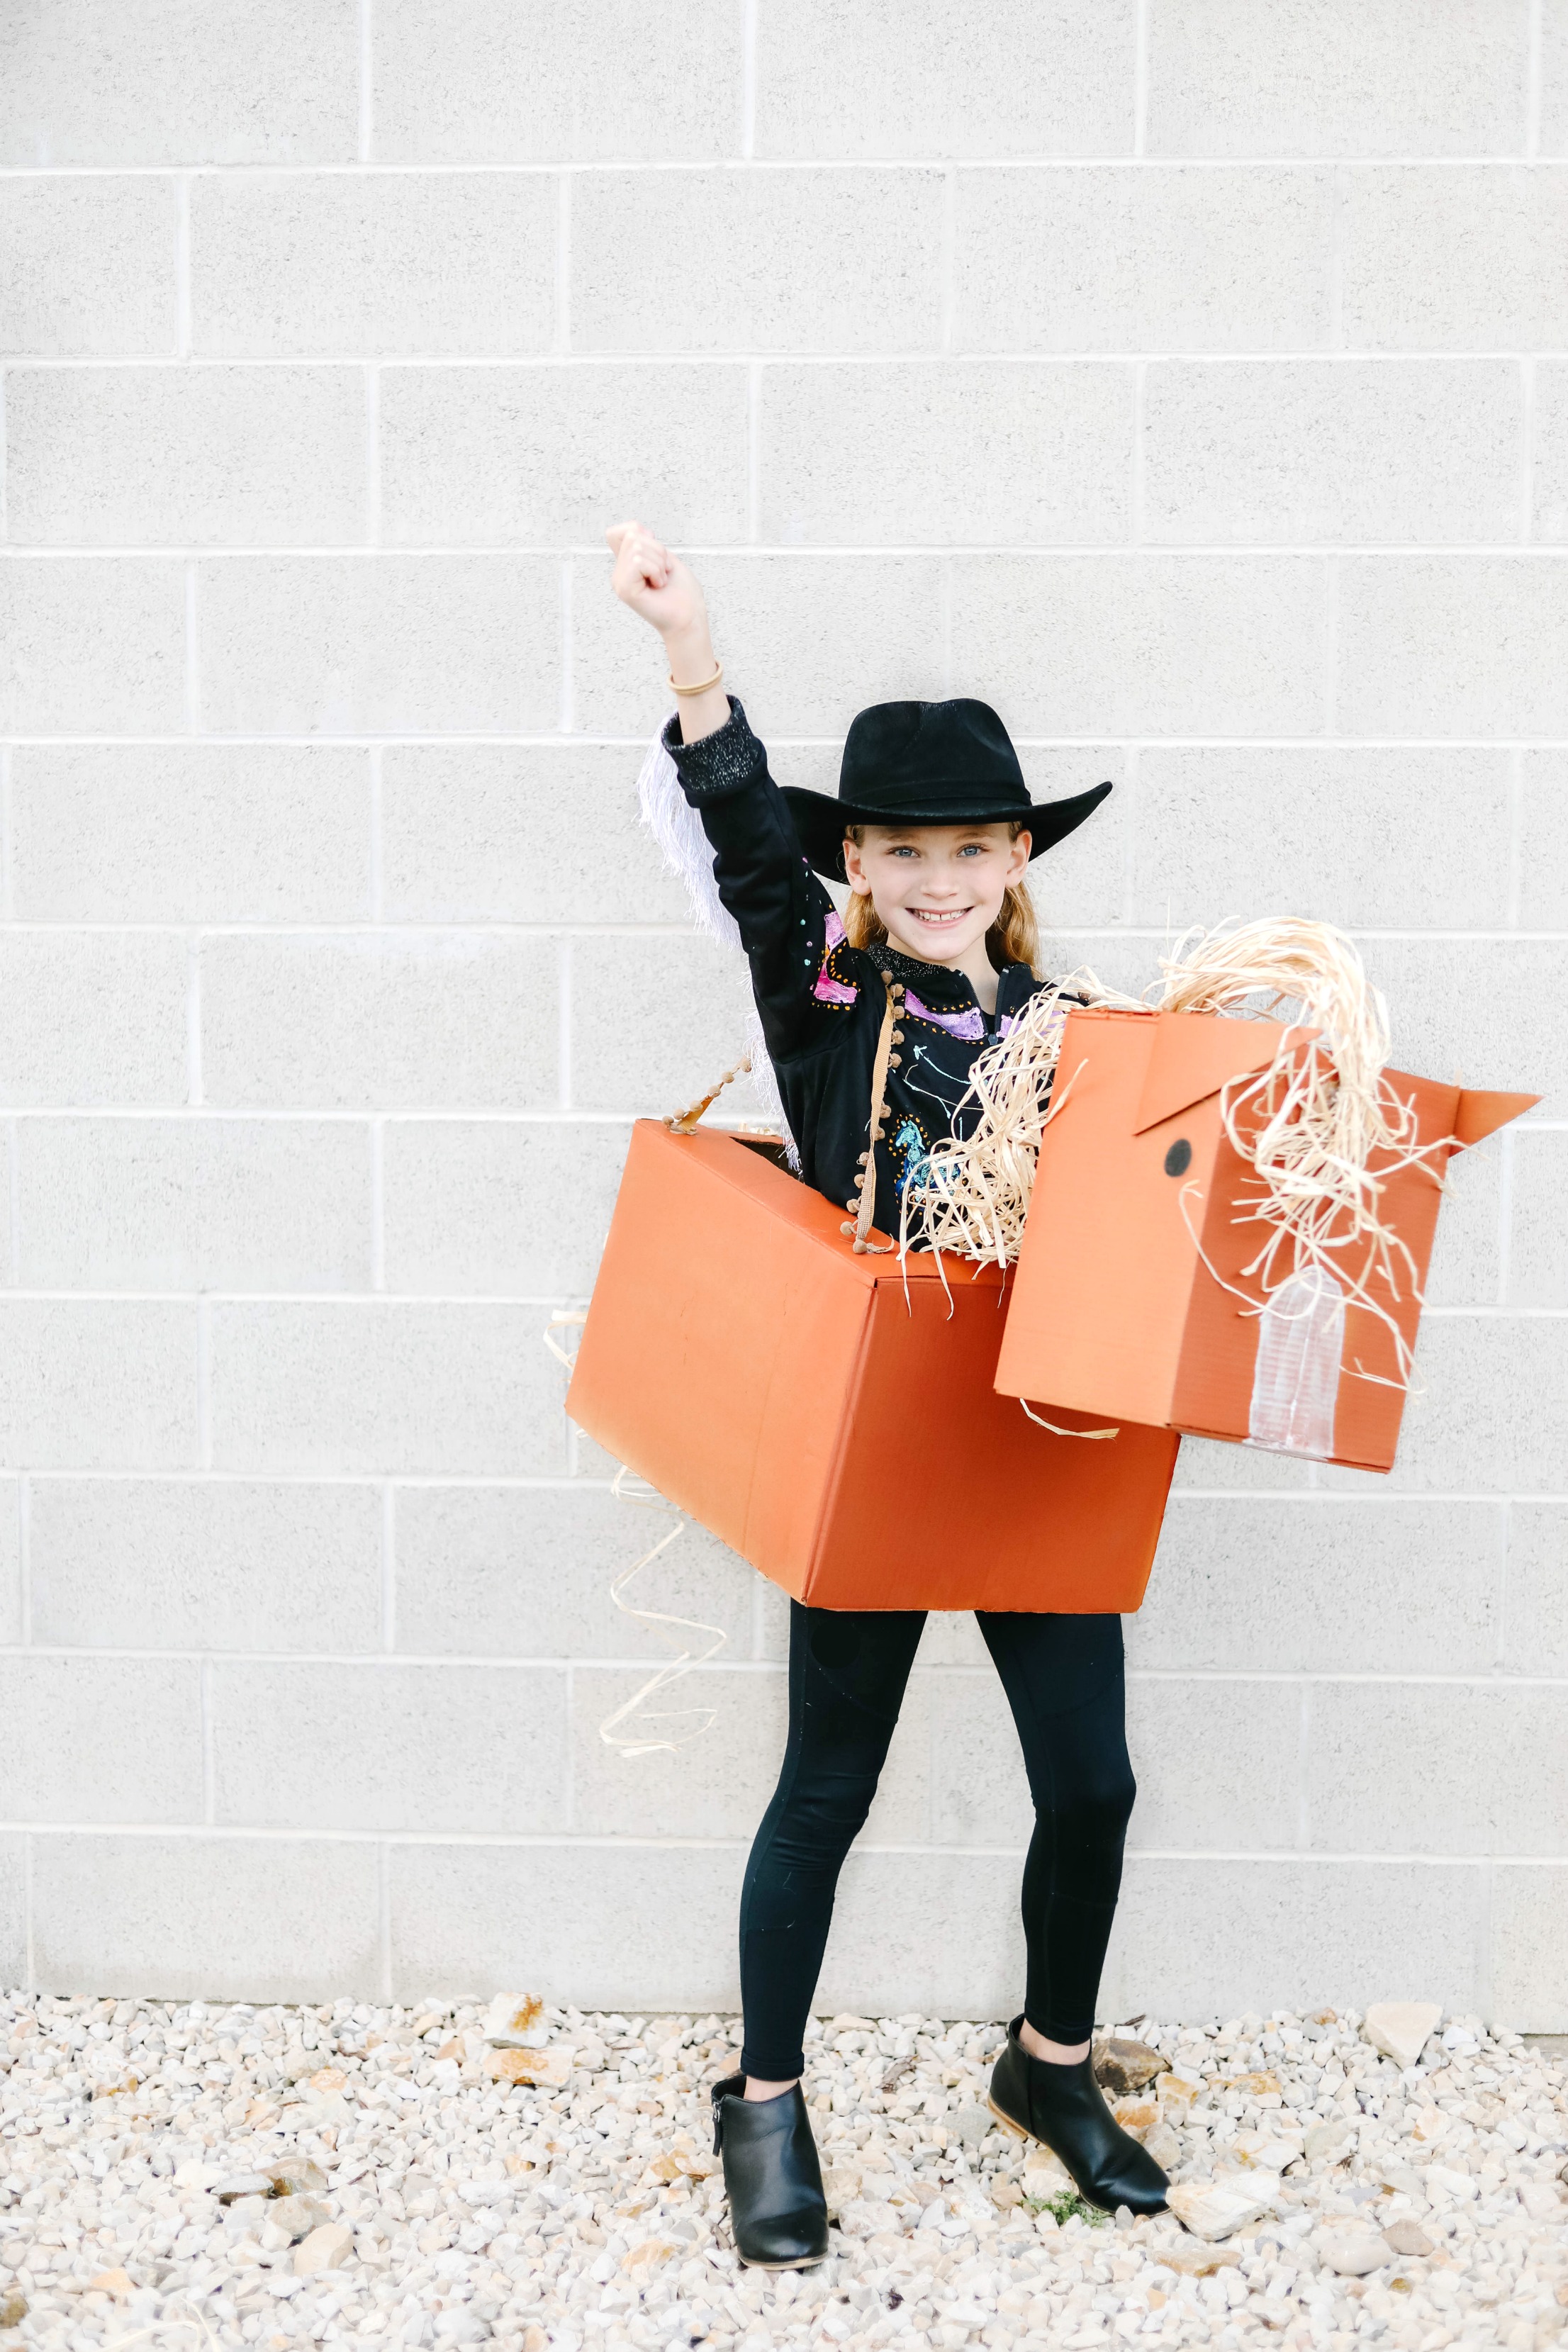 ﻿"Old Town Road" Western Boxtume DIY. Turn a catchy western song into an easy Halloween costume with Amazon Prime smile boxes and some creativity! 